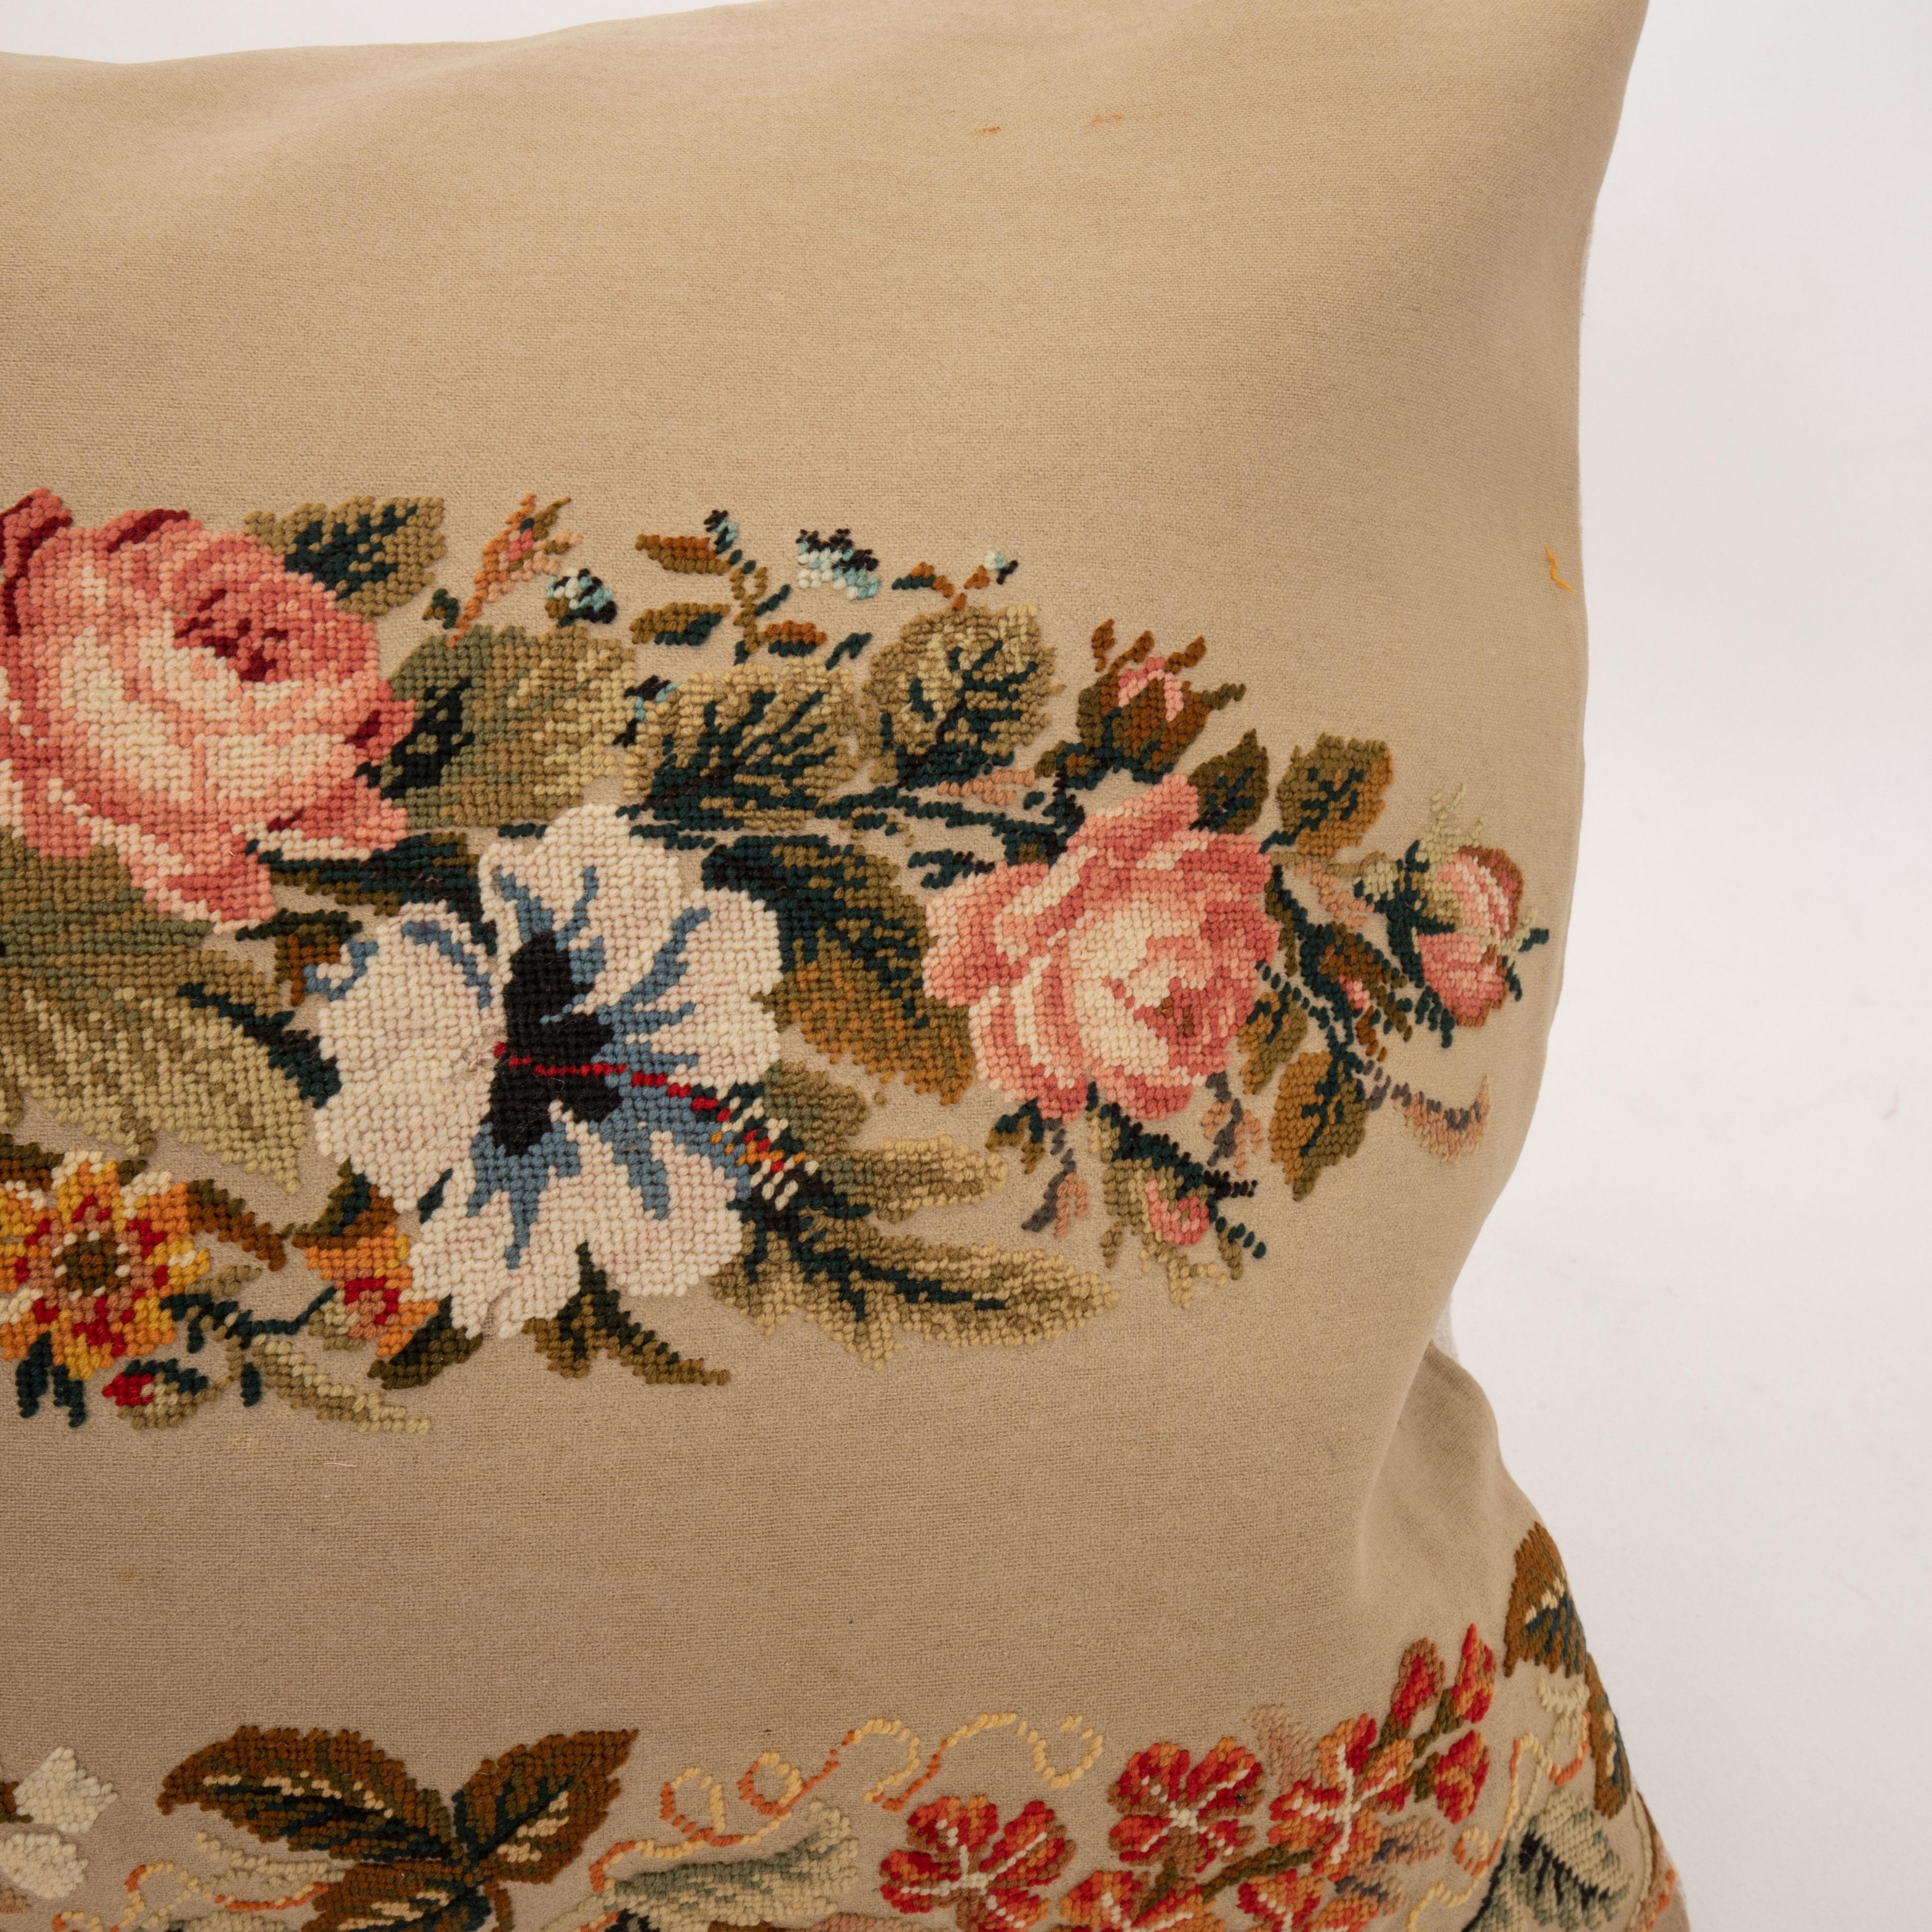 Embroidered Pillow Case Made from a European Embroidery, E 20th C.